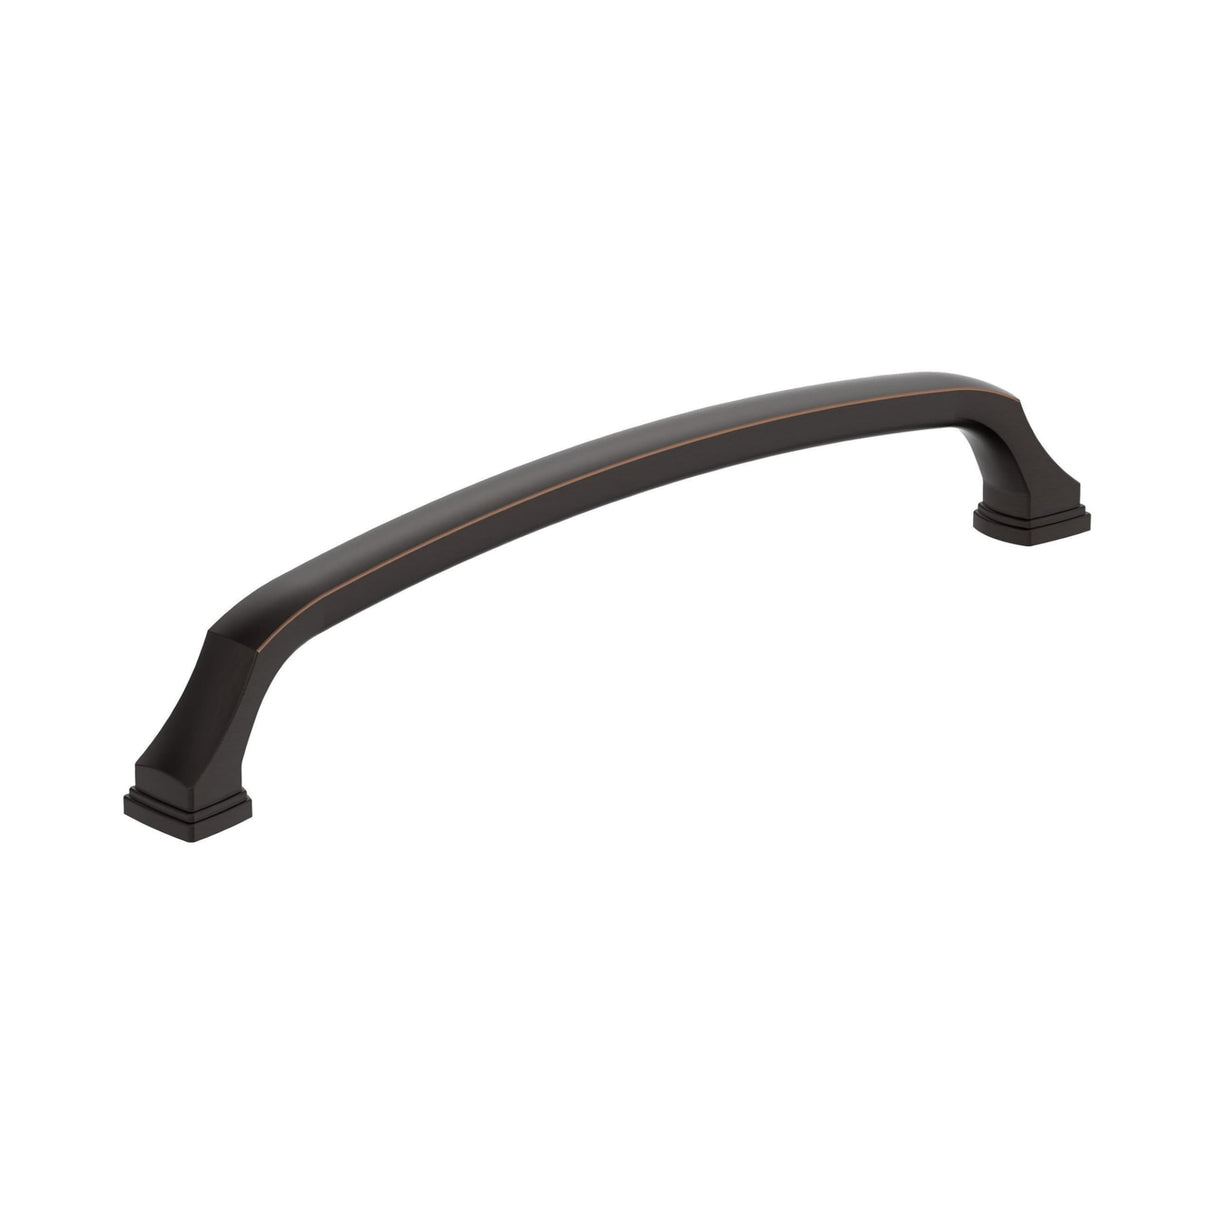 Amerock BP55351ORB Oil Rubbed Bronze Cabinet Pull 8 in (203 mm) Center-to-Center Cabinet Handle Revitalize Drawer Pull Kitchen Cabinet Handle Furniture Hardware